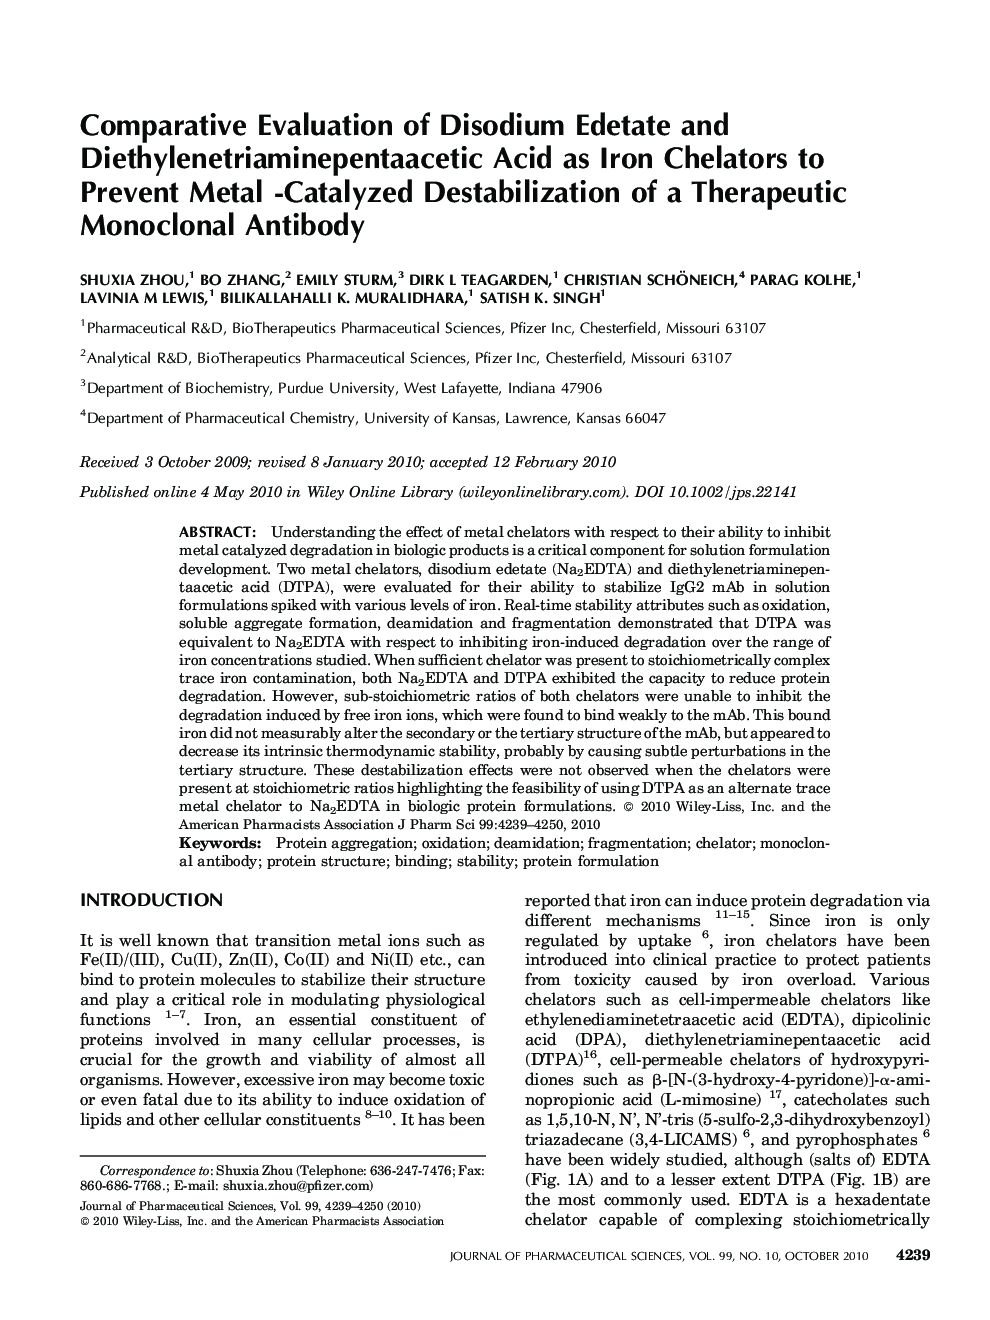 Comparative Evaluation of Disodium Edetate and Diethylenetriaminepentaacetic Acid as Iron Chelators to Prevent Metal -Catalyzed Destabilization of a Therapeutic Monoclonal Antibody